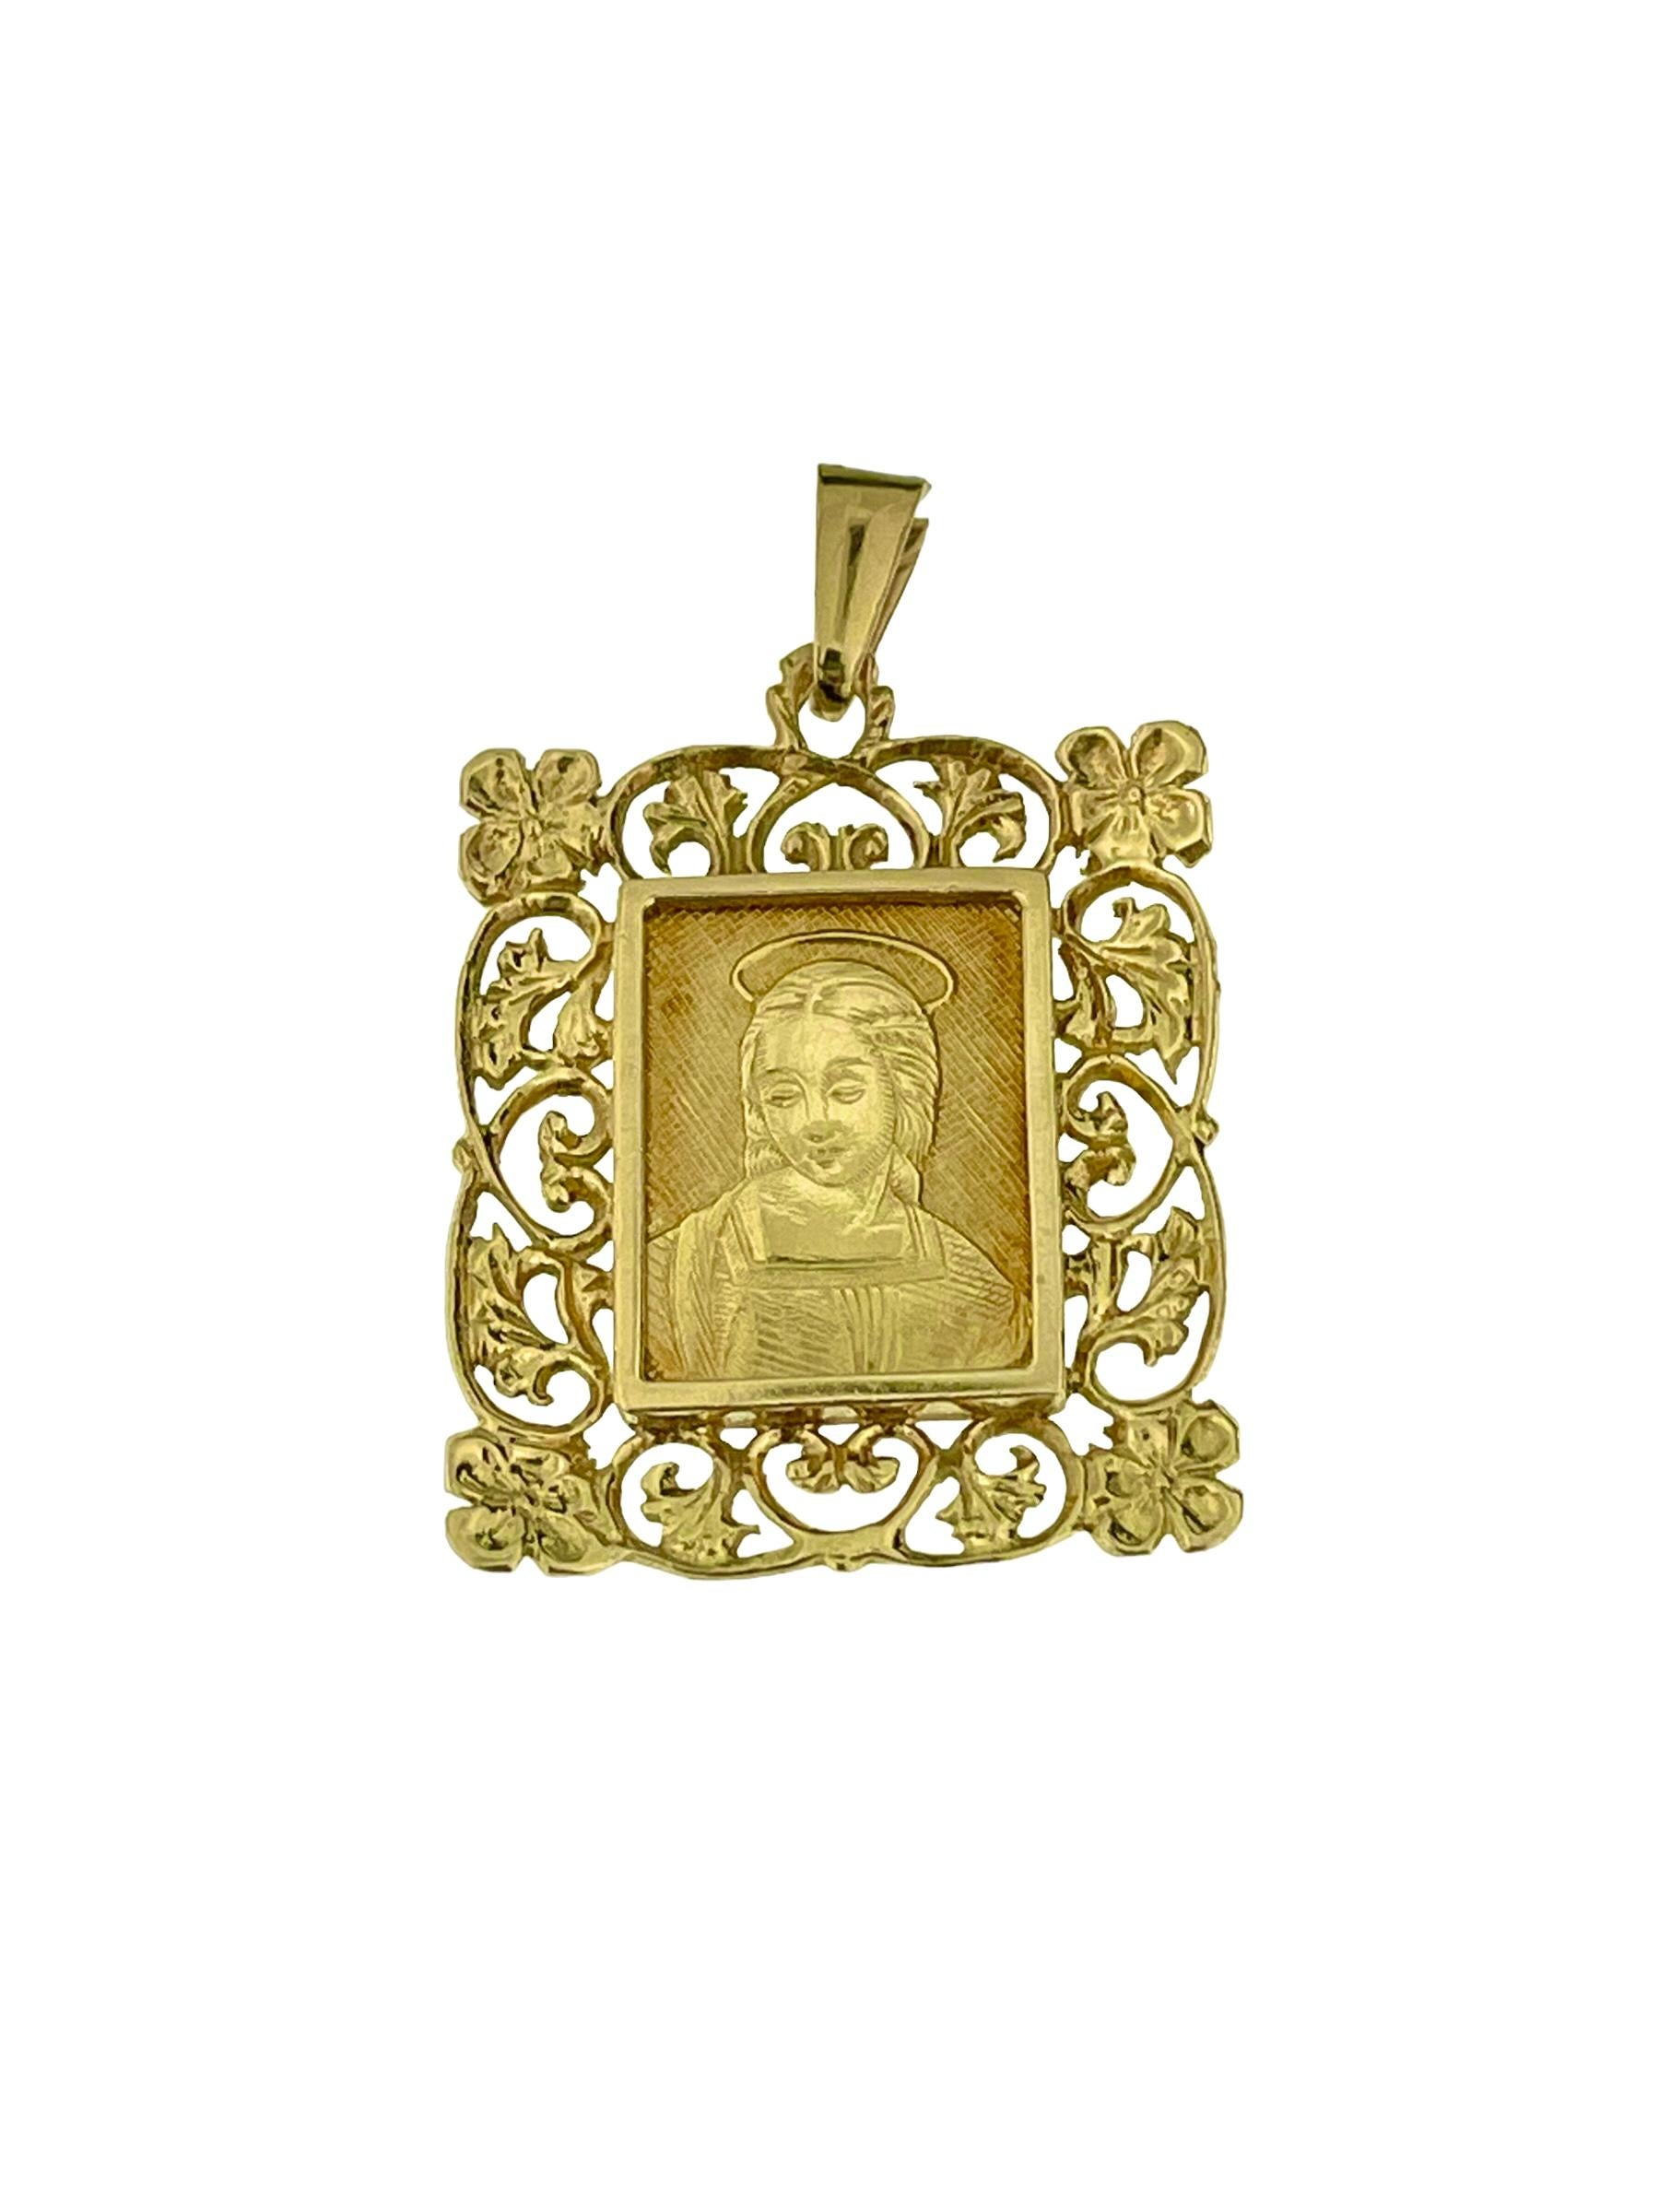 Women's or Men's Antique Yellow Gold Pendant representing Raphael's Madonna of the Goldfinch For Sale